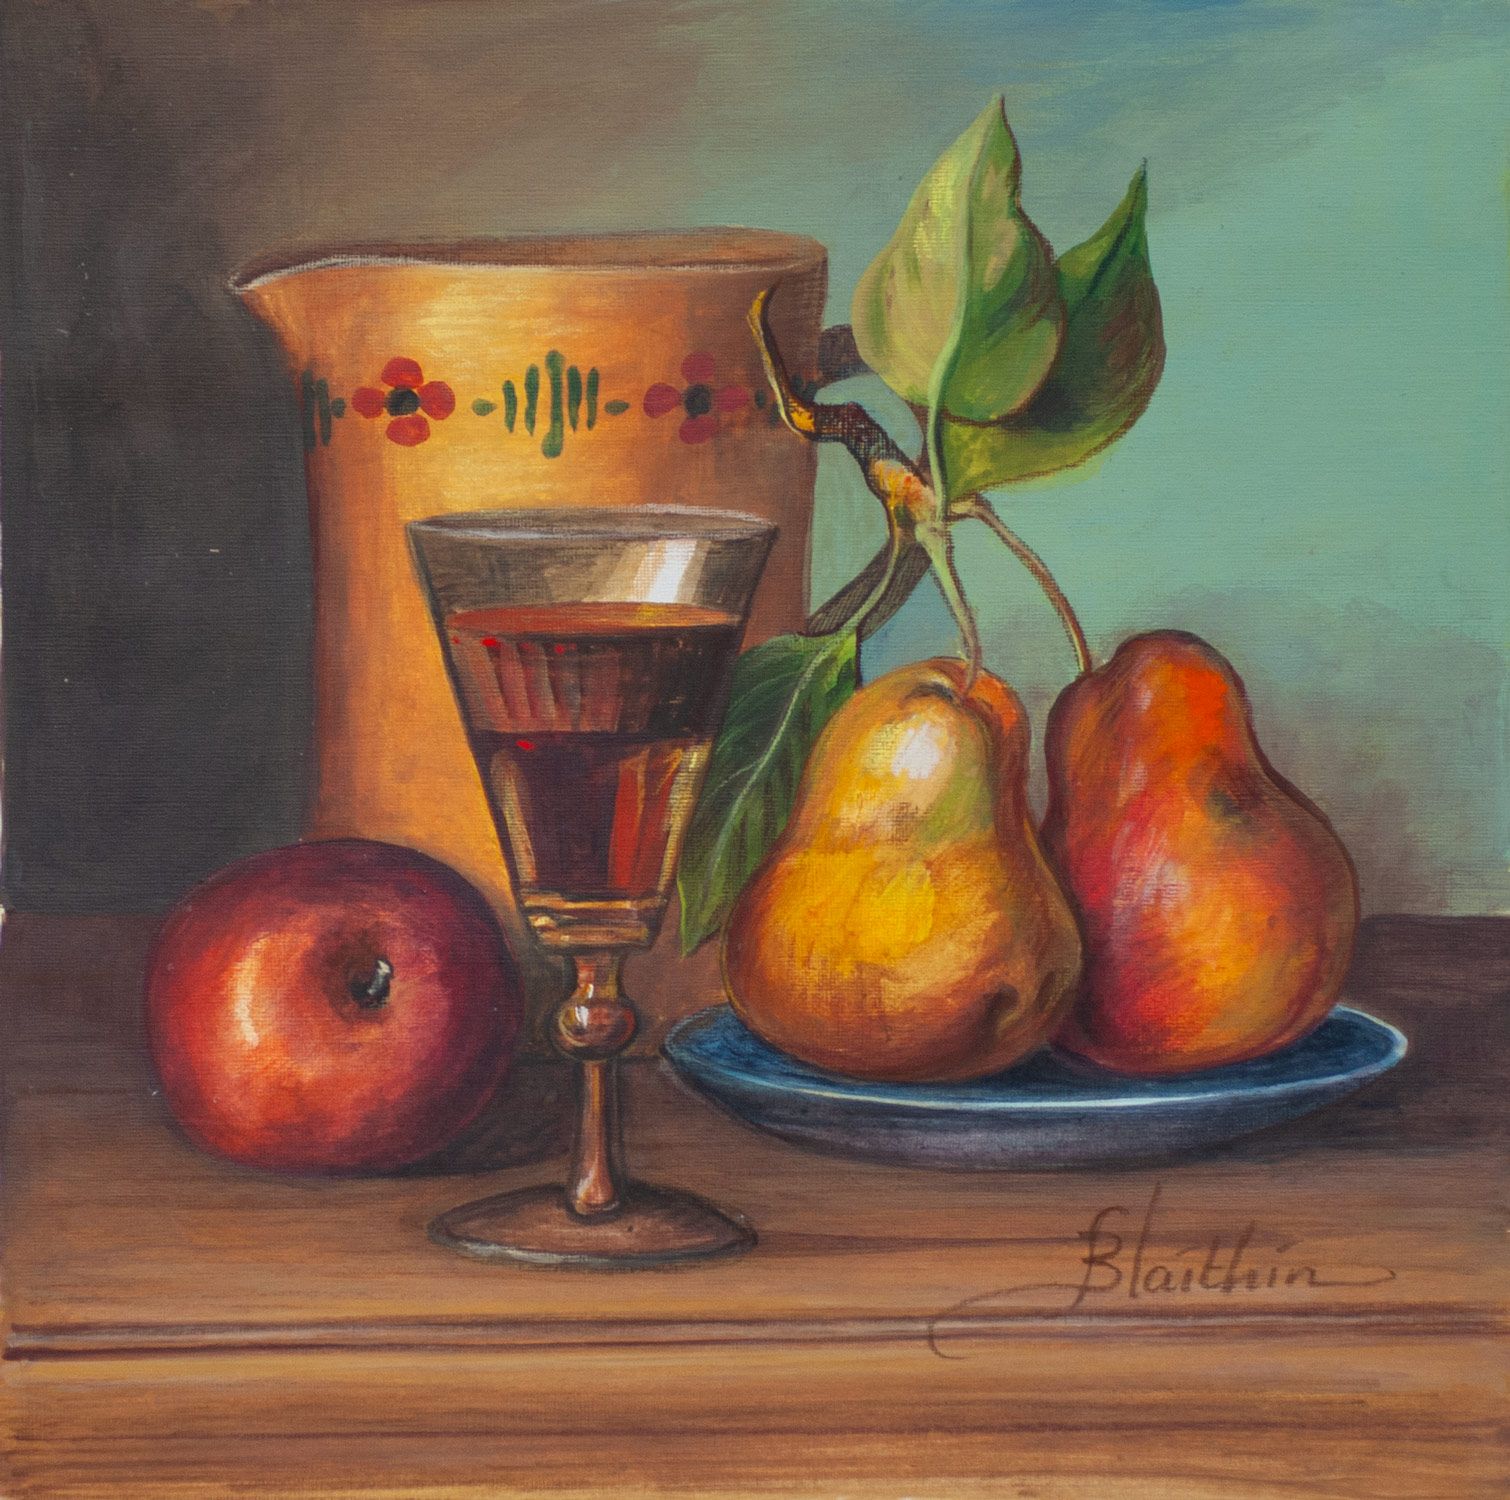 A Glass of Red with Fruit by Blaithin O'Ciobhain